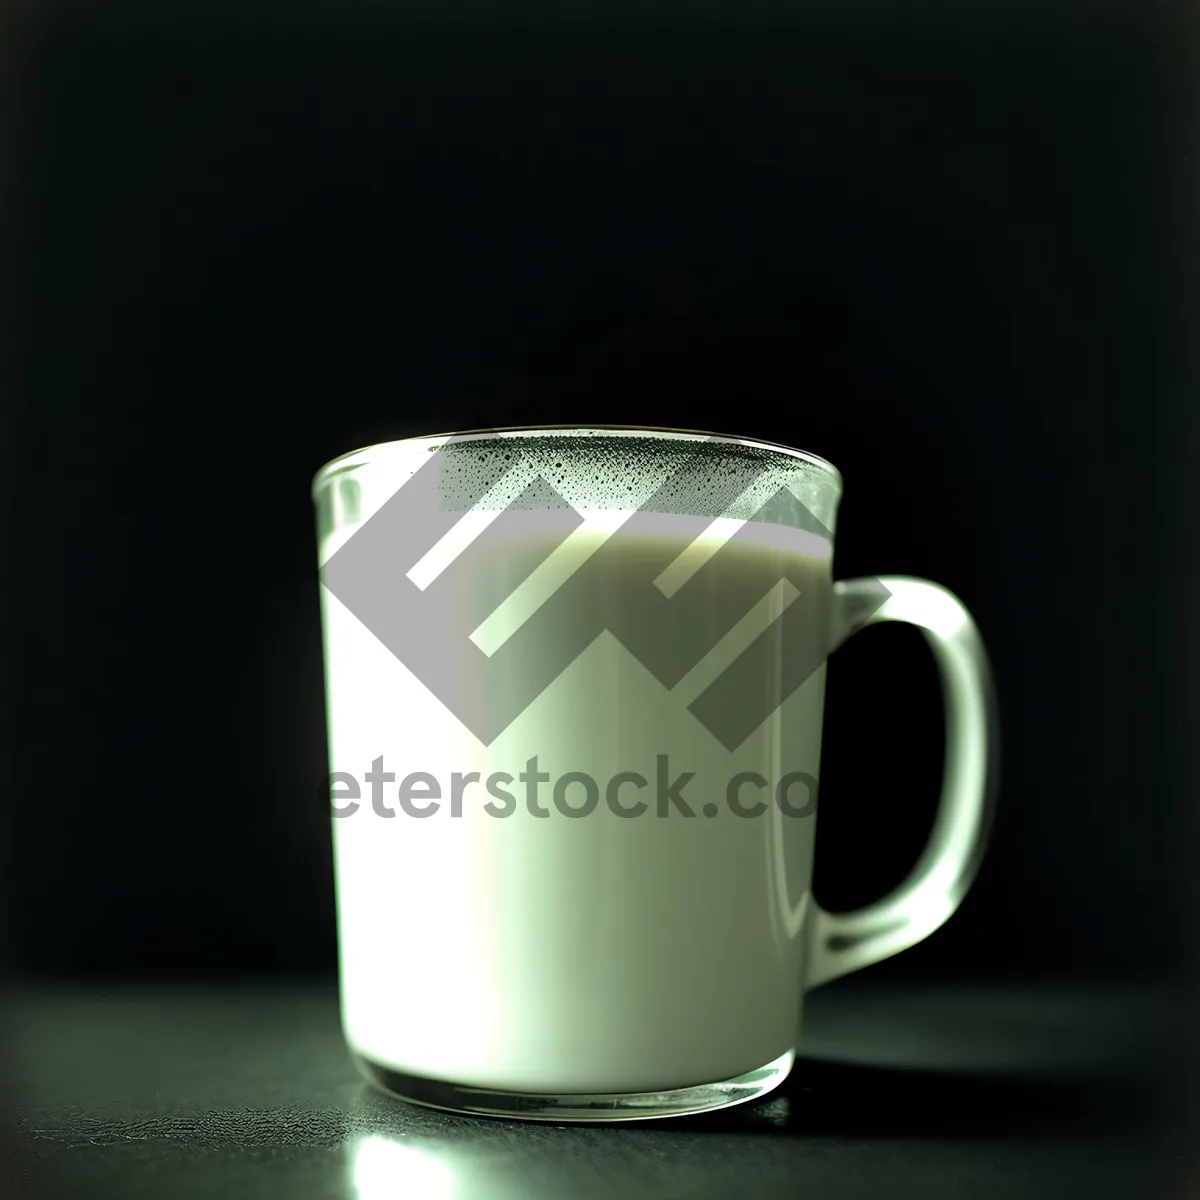 Picture of Hot Coffee in Brown Mug with Spoon on Table